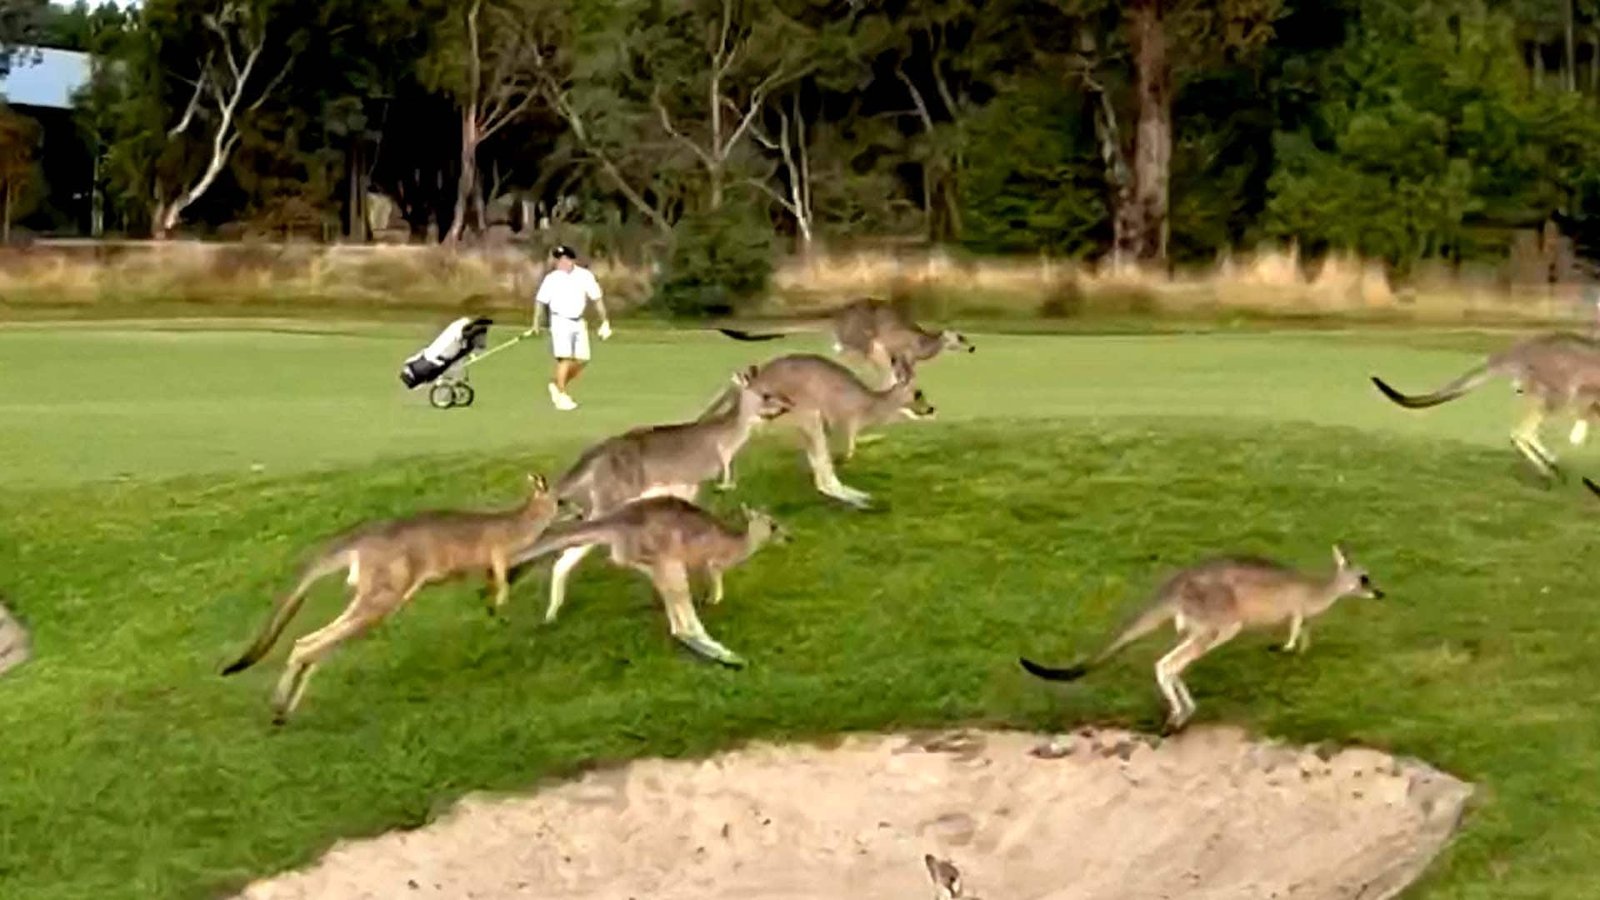 #TheMoment a mob of kangaroos took over this golf course